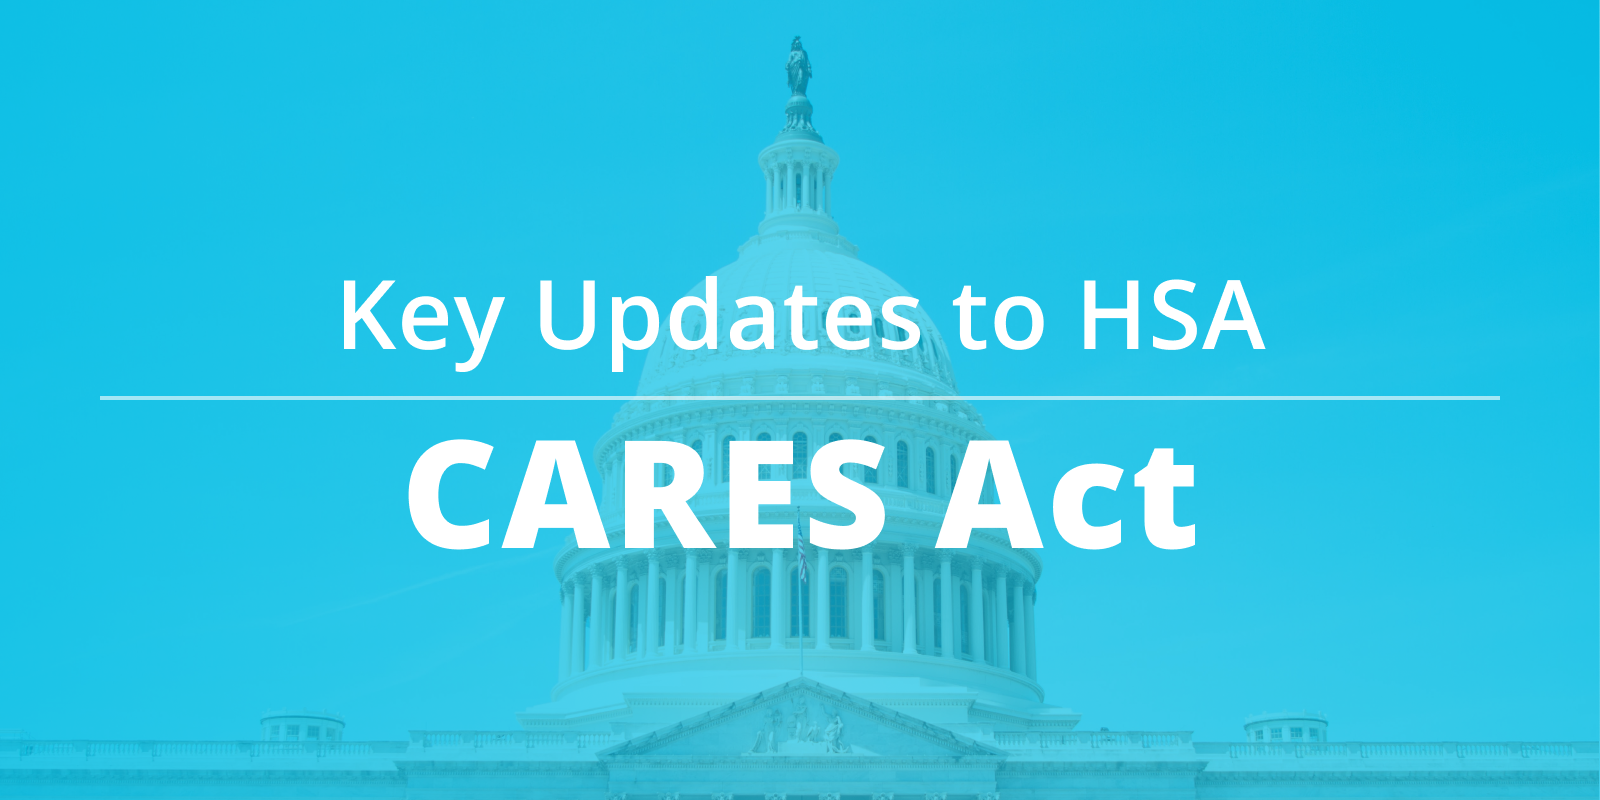 Key Updates to Health Savings Account (HSA) in the CARES Act